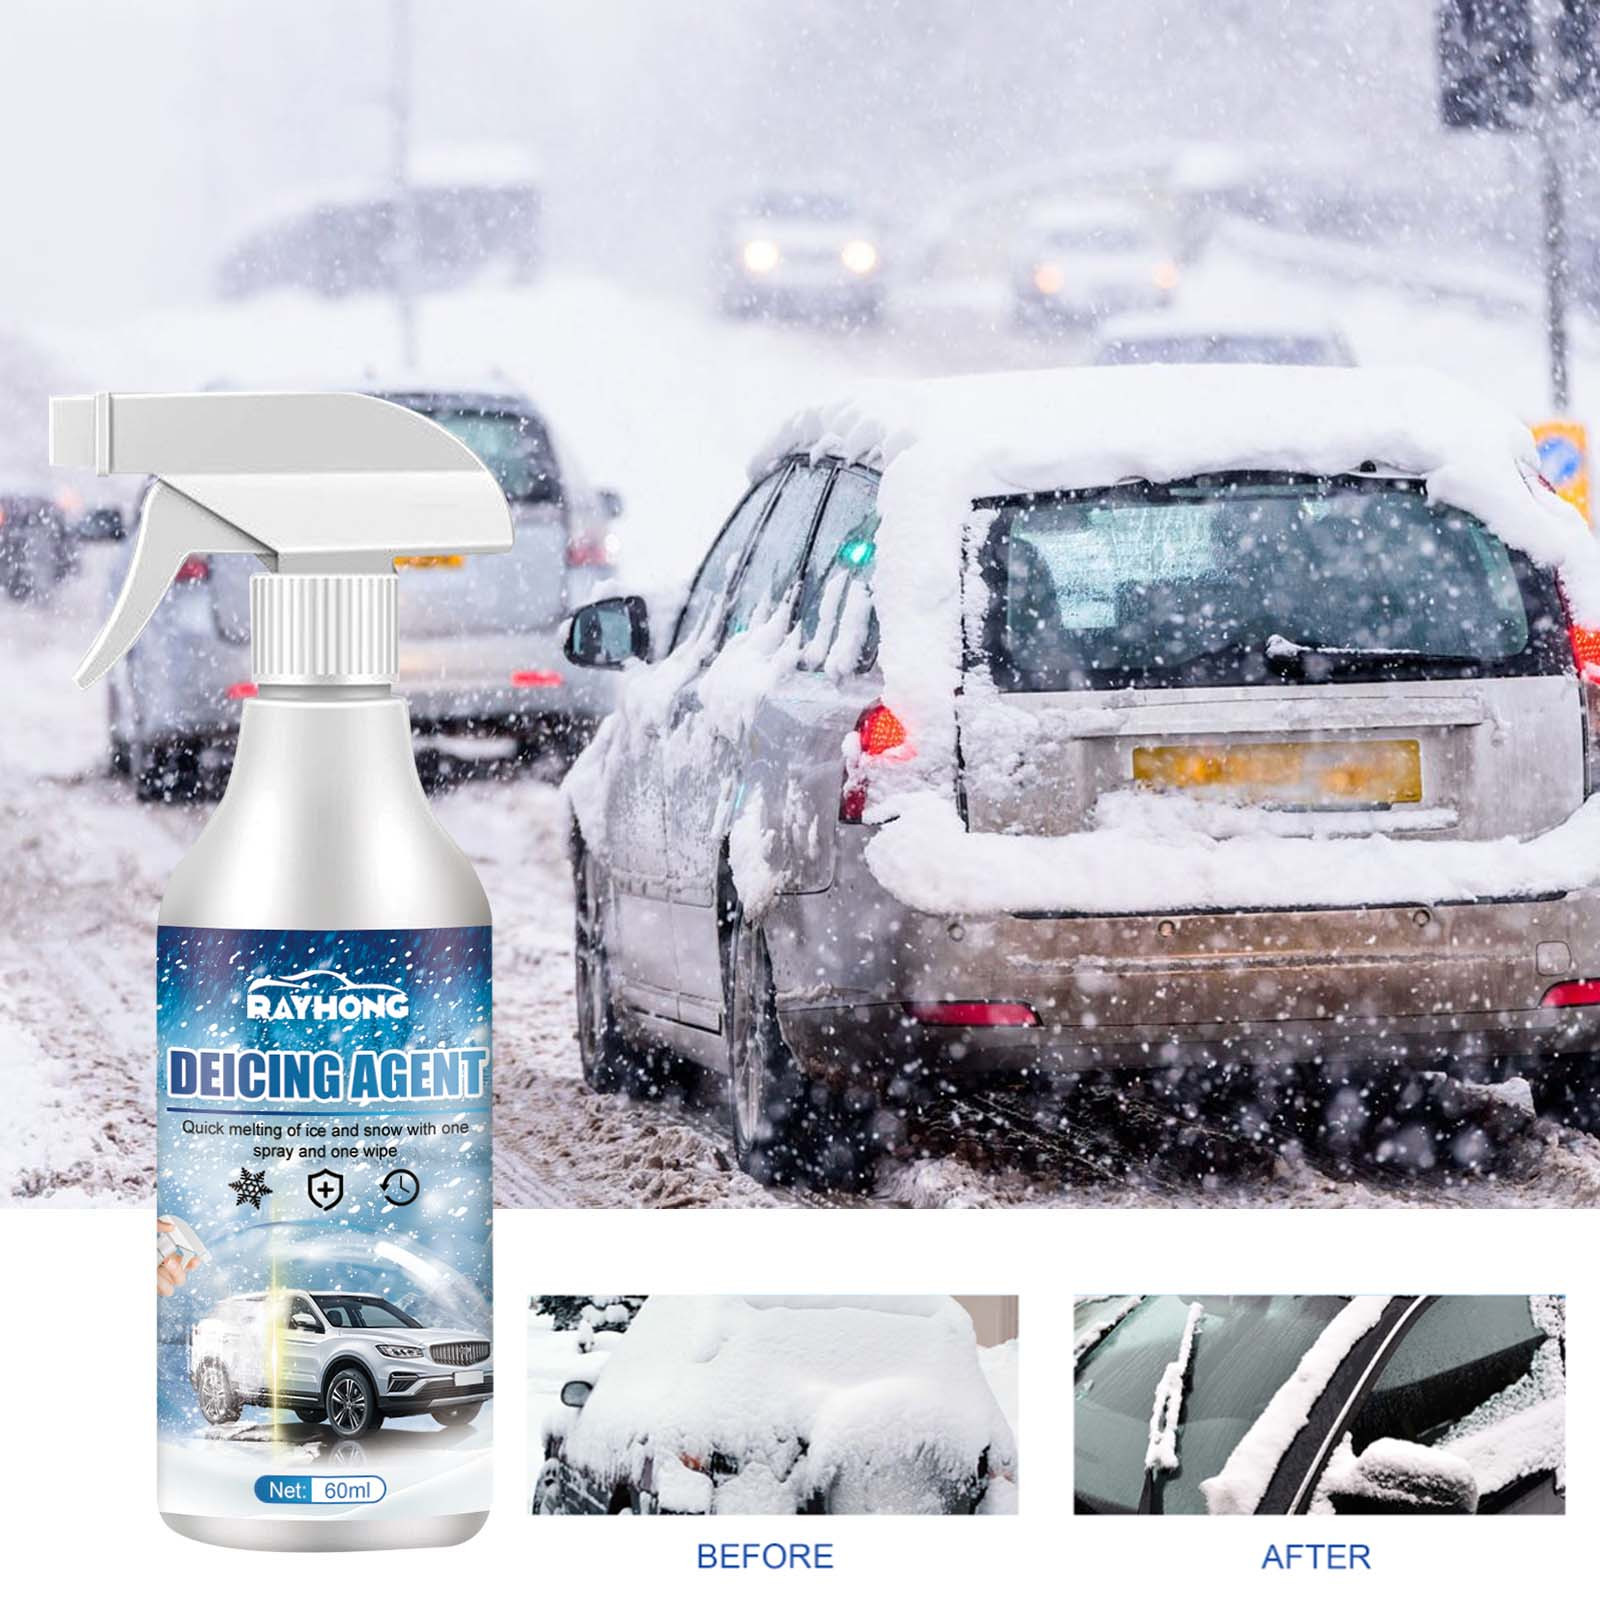 Windshield Deicing Spray Defrosting Antifreeze High Concentration Fast  Melting of Ice and Snow for Car Windshield Windows Wipers and Mirrors 60ml  